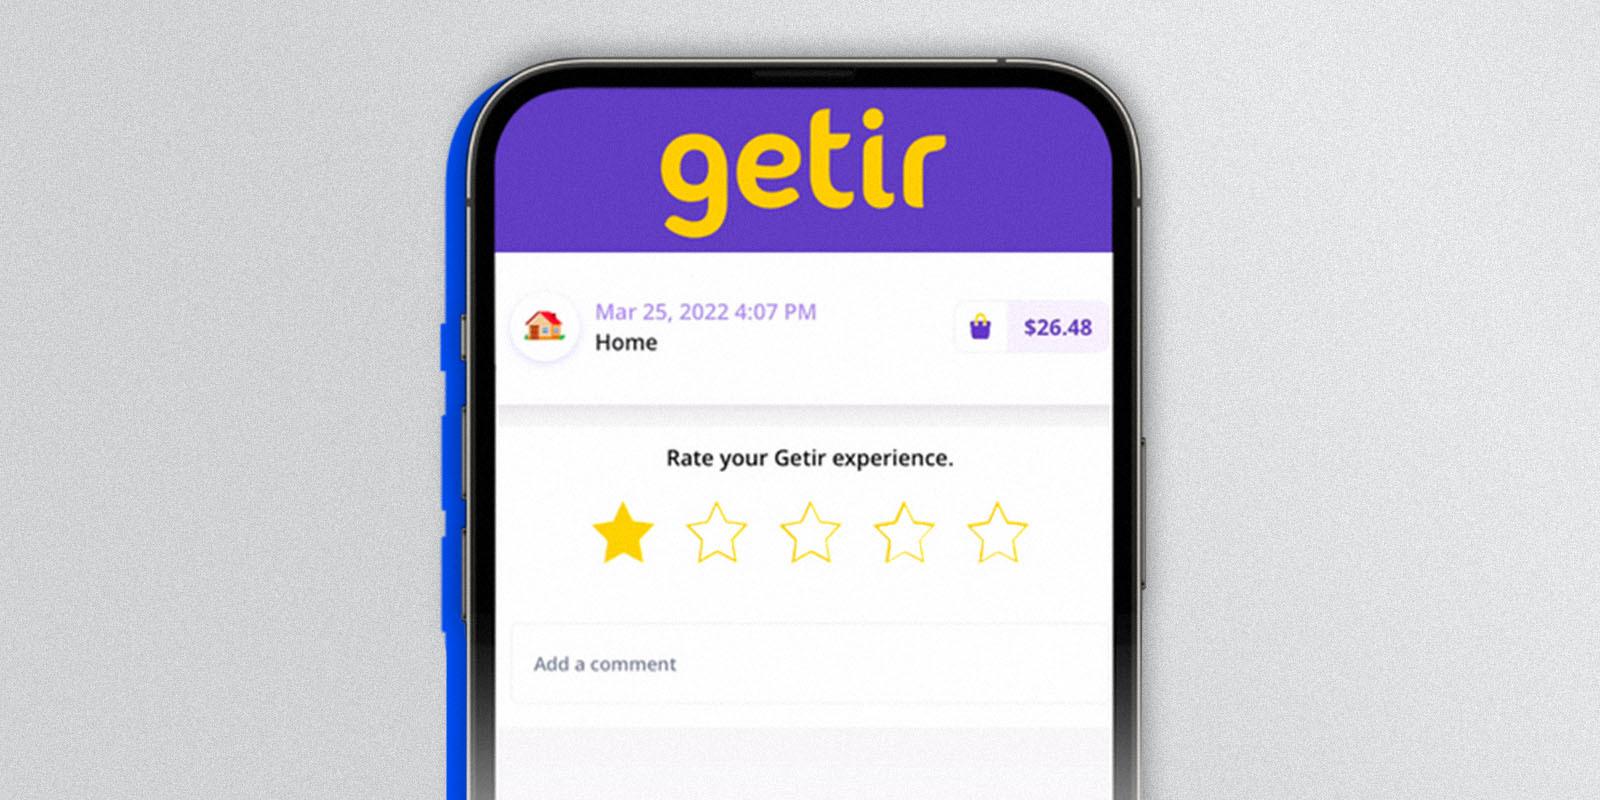 Turkish Grocery Delivery Firm Getir’s Been Better